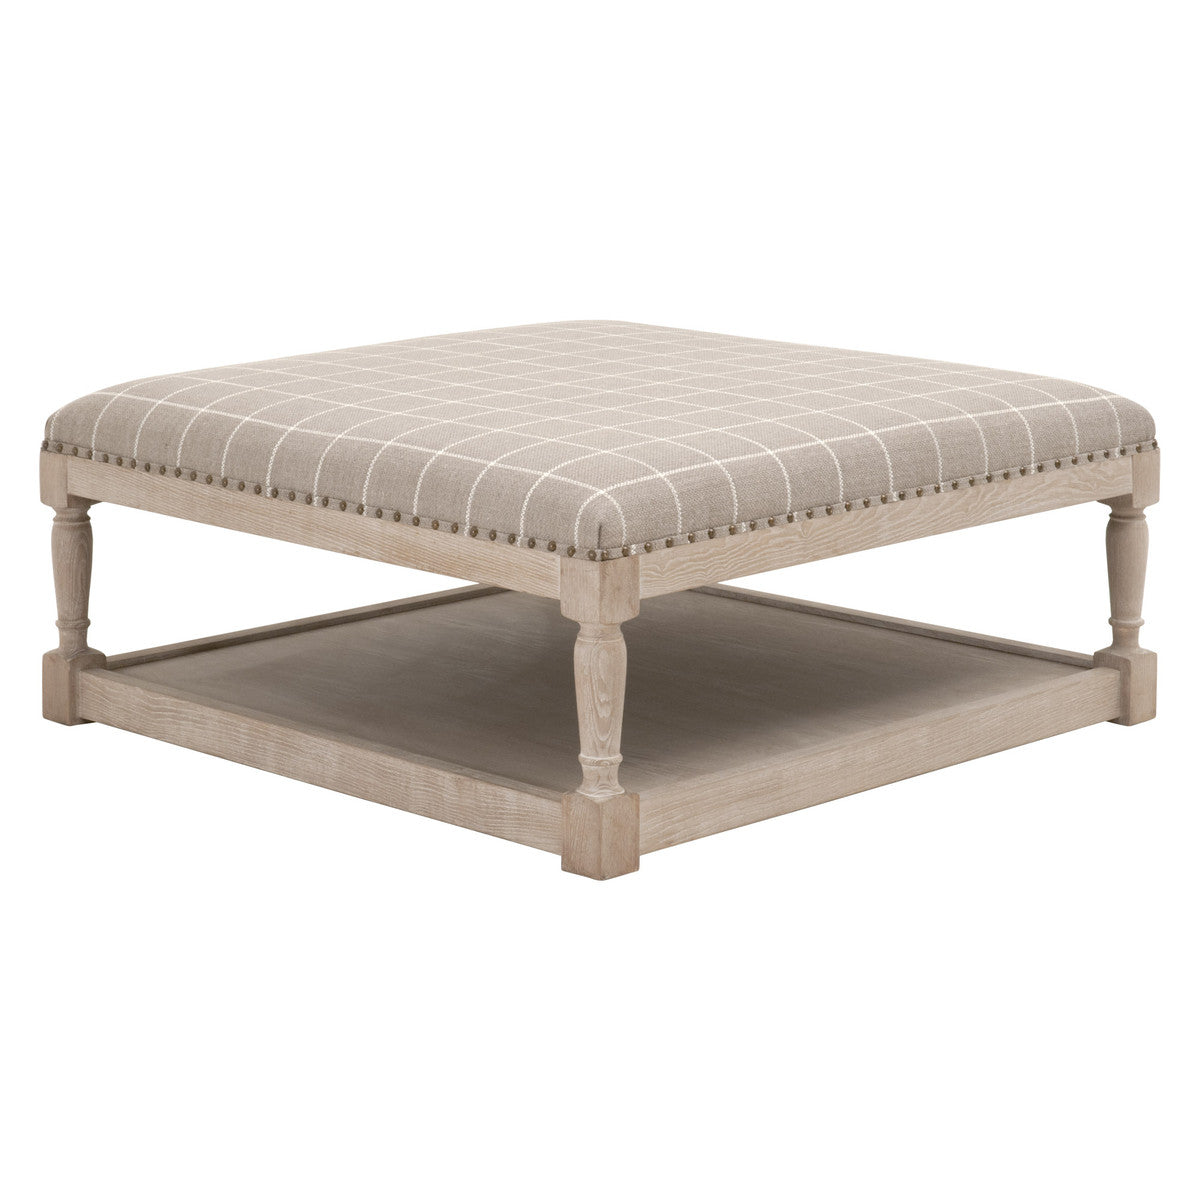 TOWNSEND UPHOLSTERED COFFEE TABLE - WINDOWPANE PEBBLE